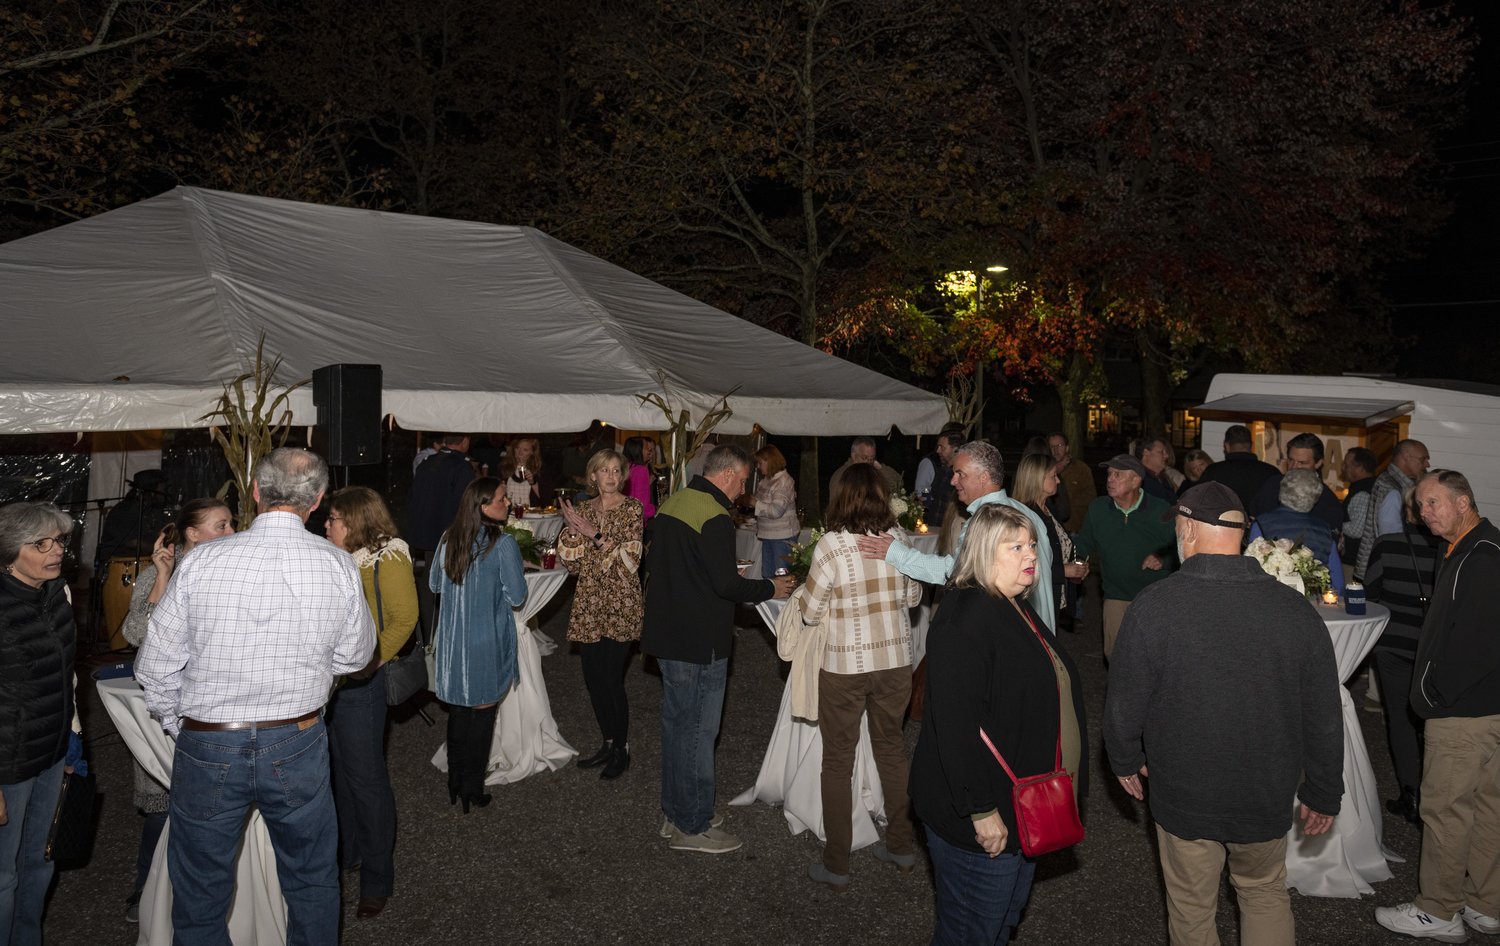 The event included an oyster shucker, mobile bar, live band and delicious seasonal fare.